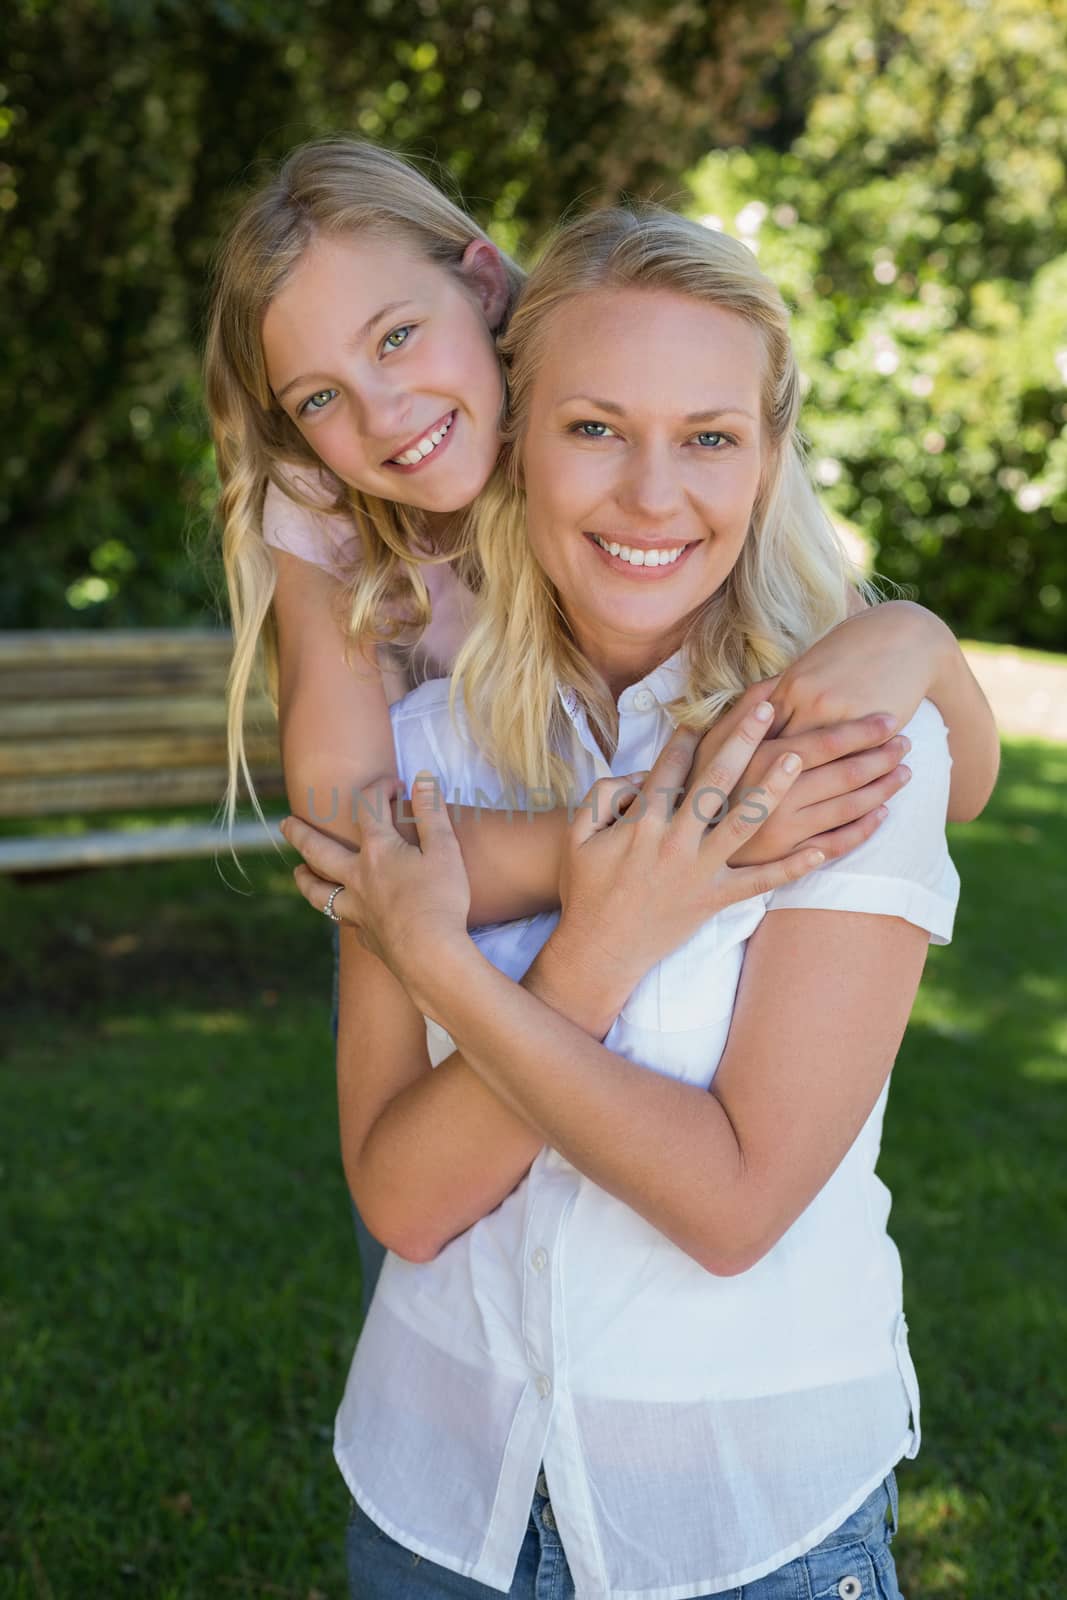 Girl embracing mother from behind in park by Wavebreakmedia